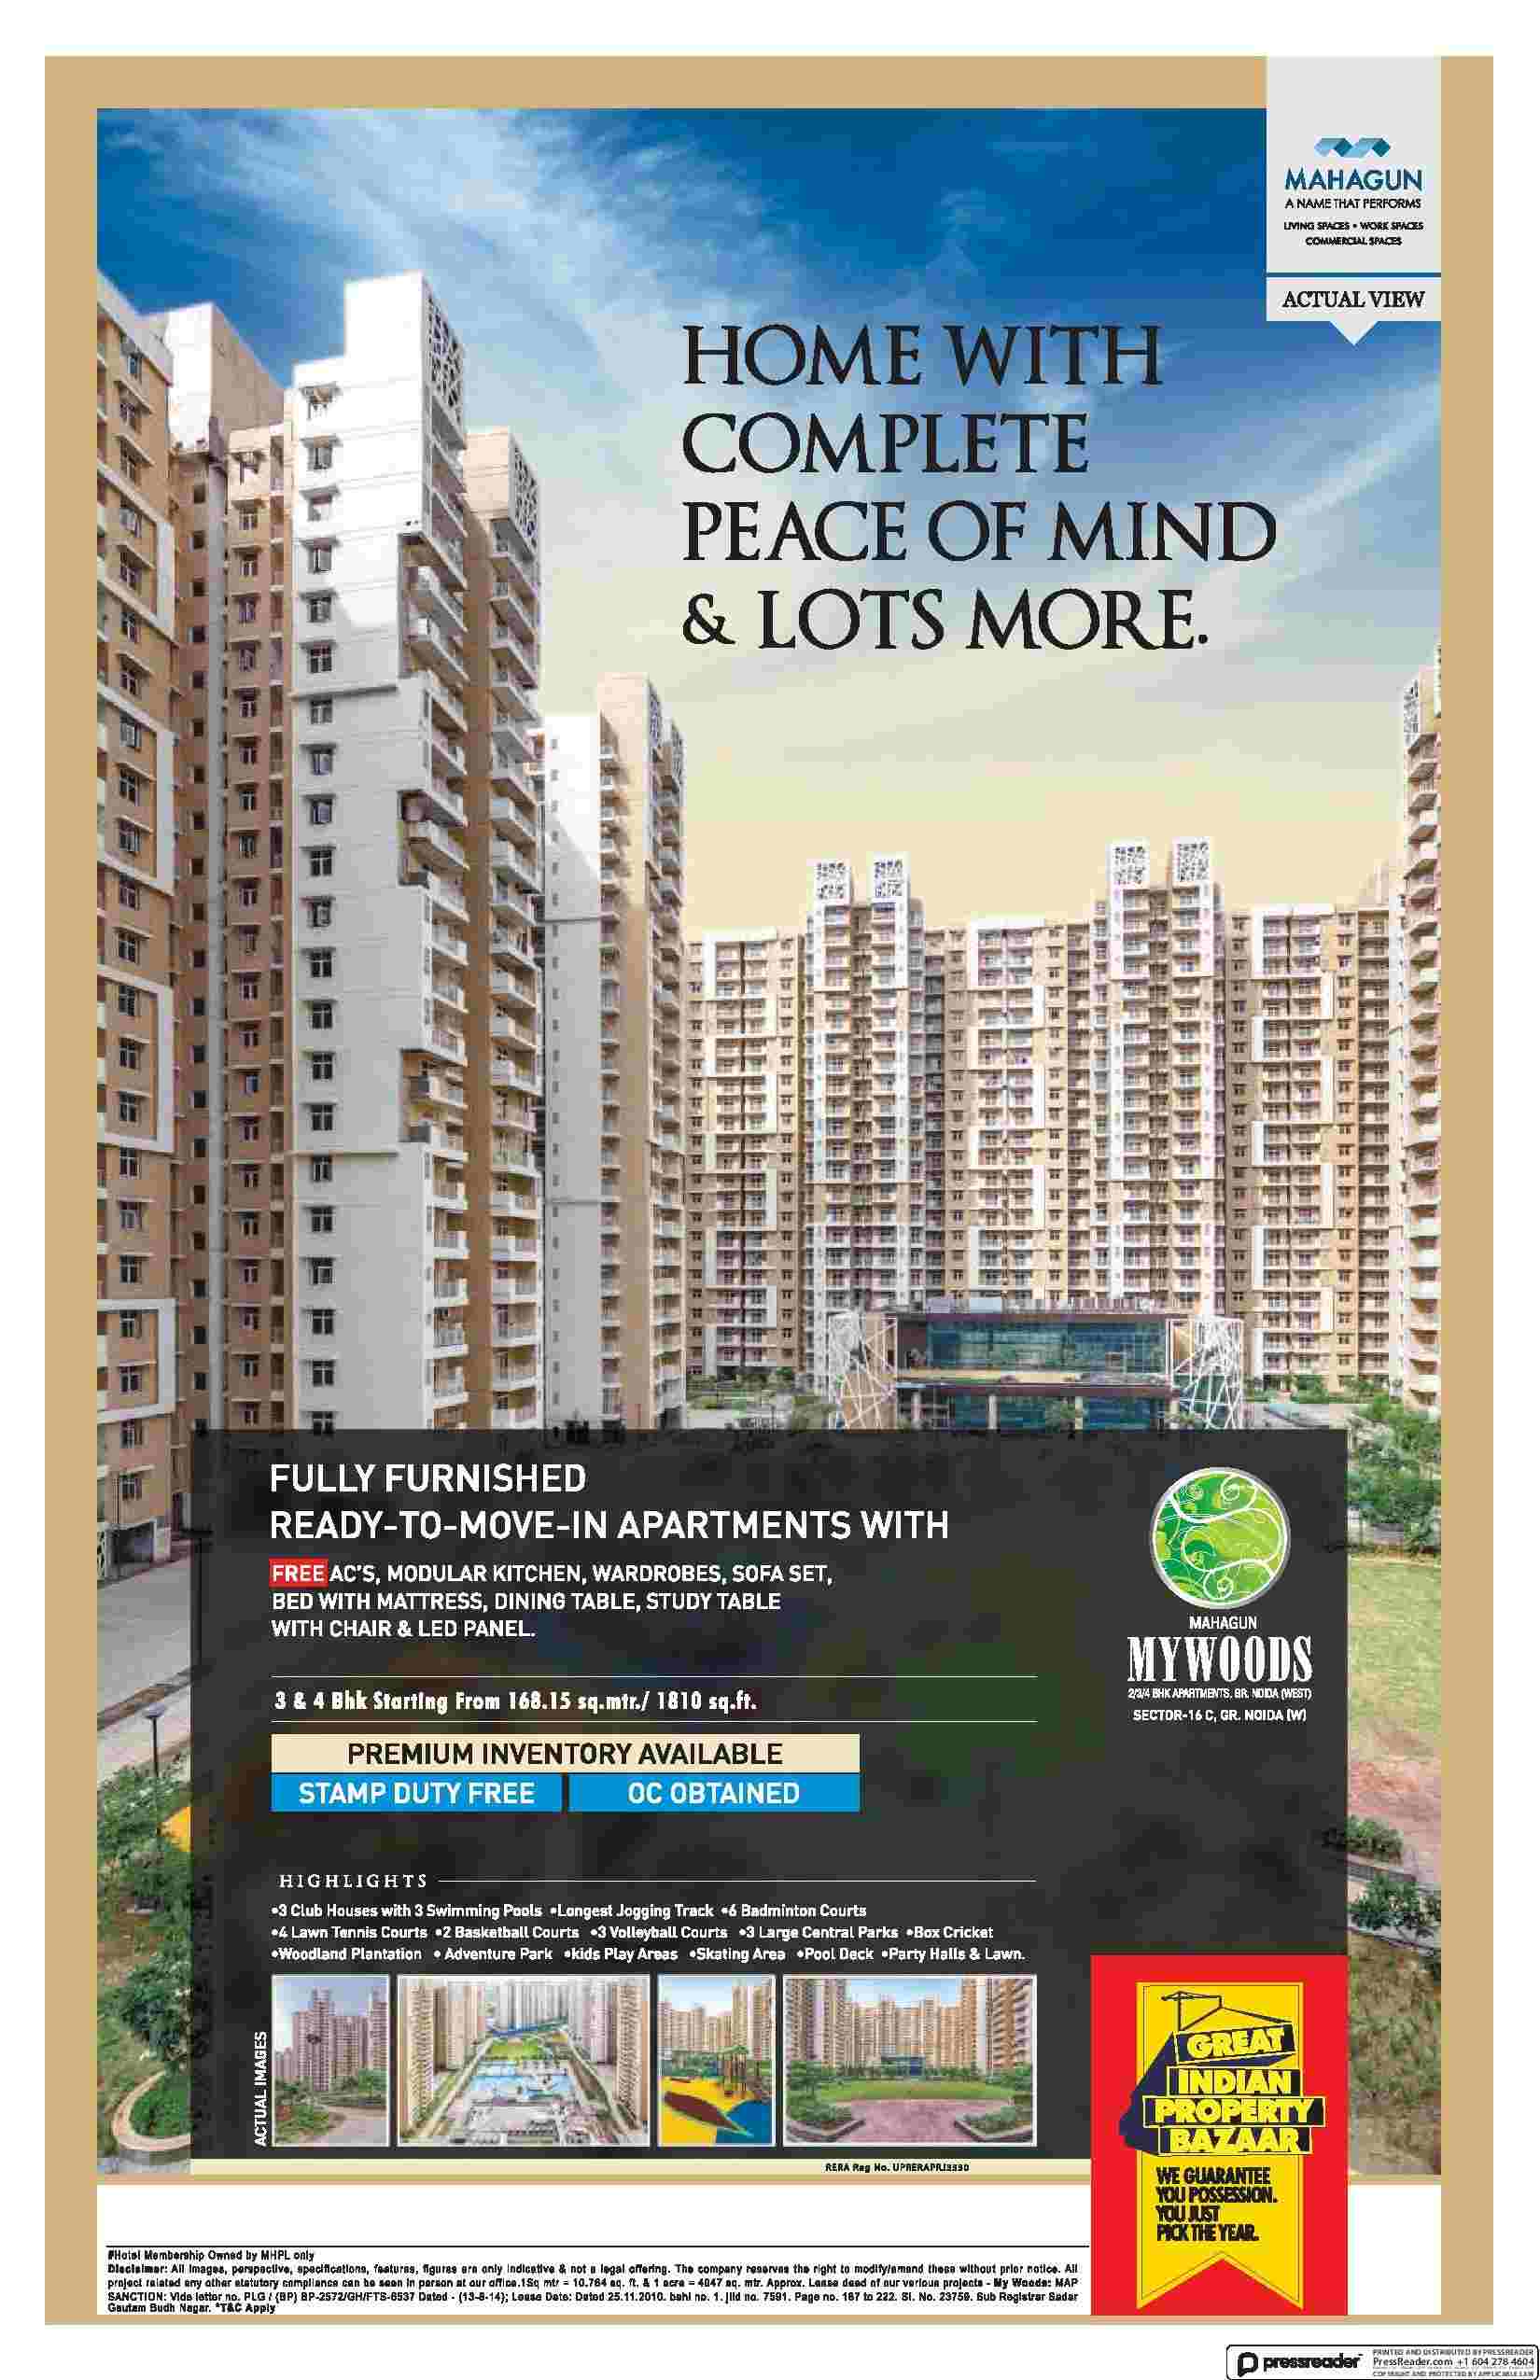 Live in home with complete peace of mind & lots more at Mahagun Mywoods in Greater Noida Update